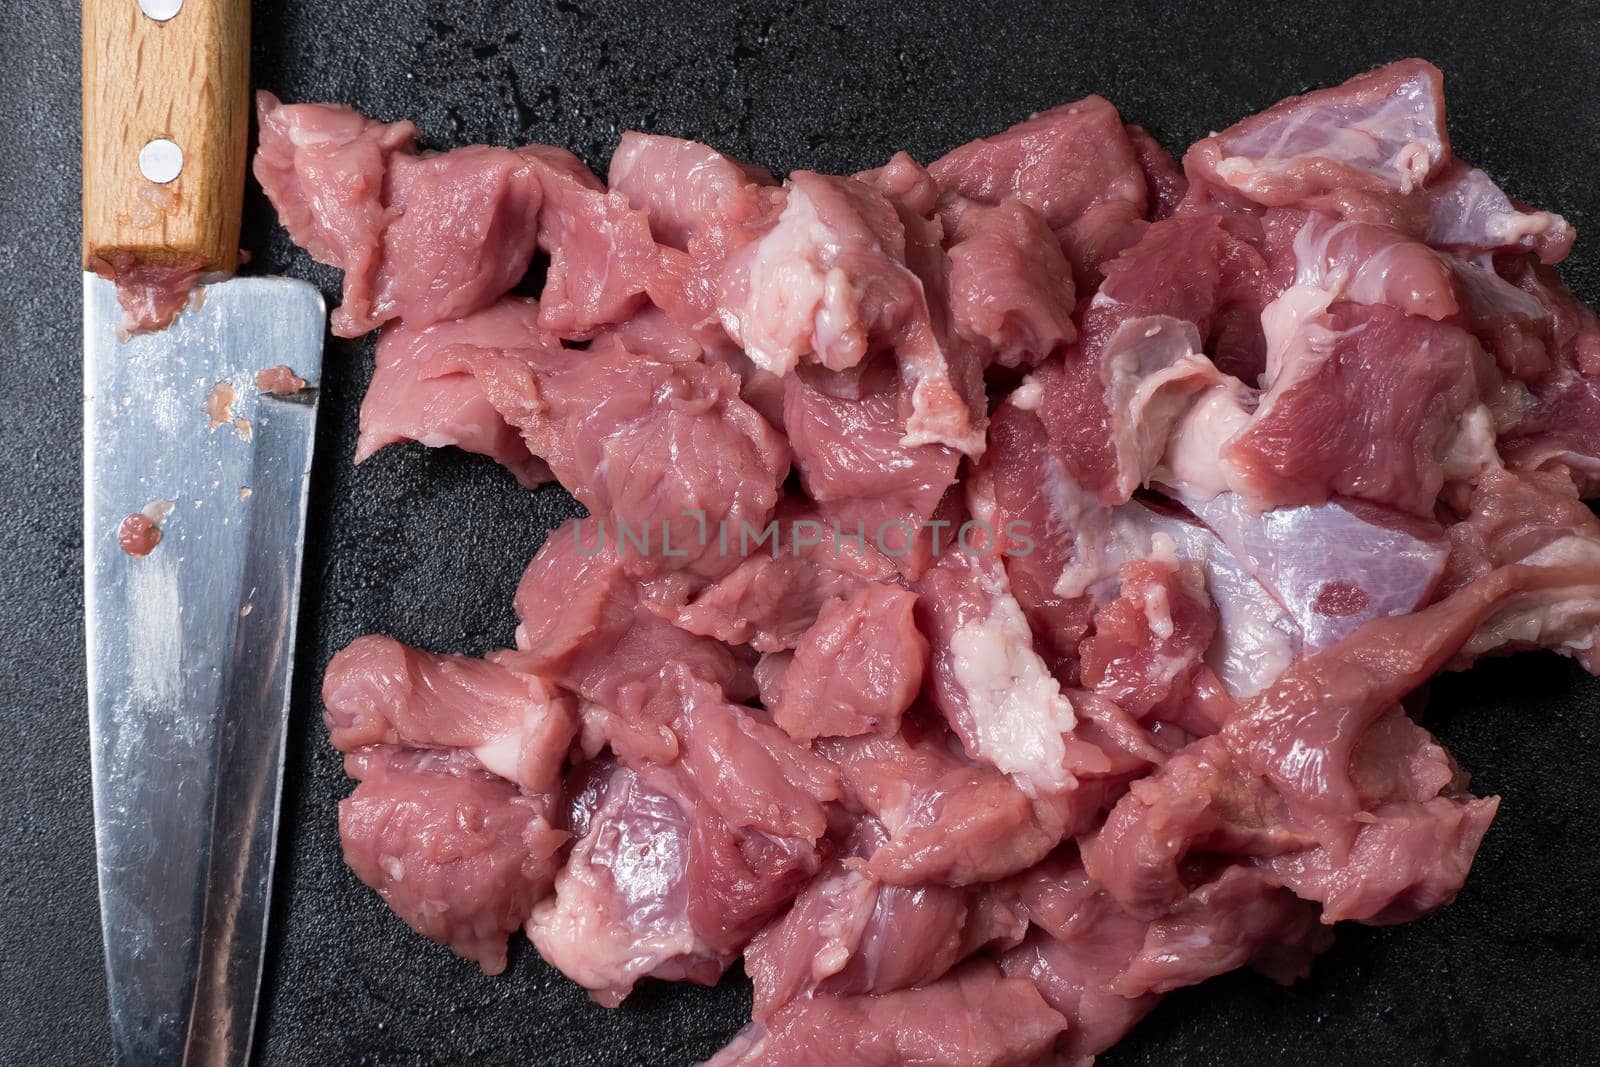 Slice the pork or beef with a knife on the table in close-up.Preparation of meat dishes and food products.Pieces of red meat for shish kebab,barbecue or kebab.Raw fresh meat is cut with a knife.recipe by YevgeniySam